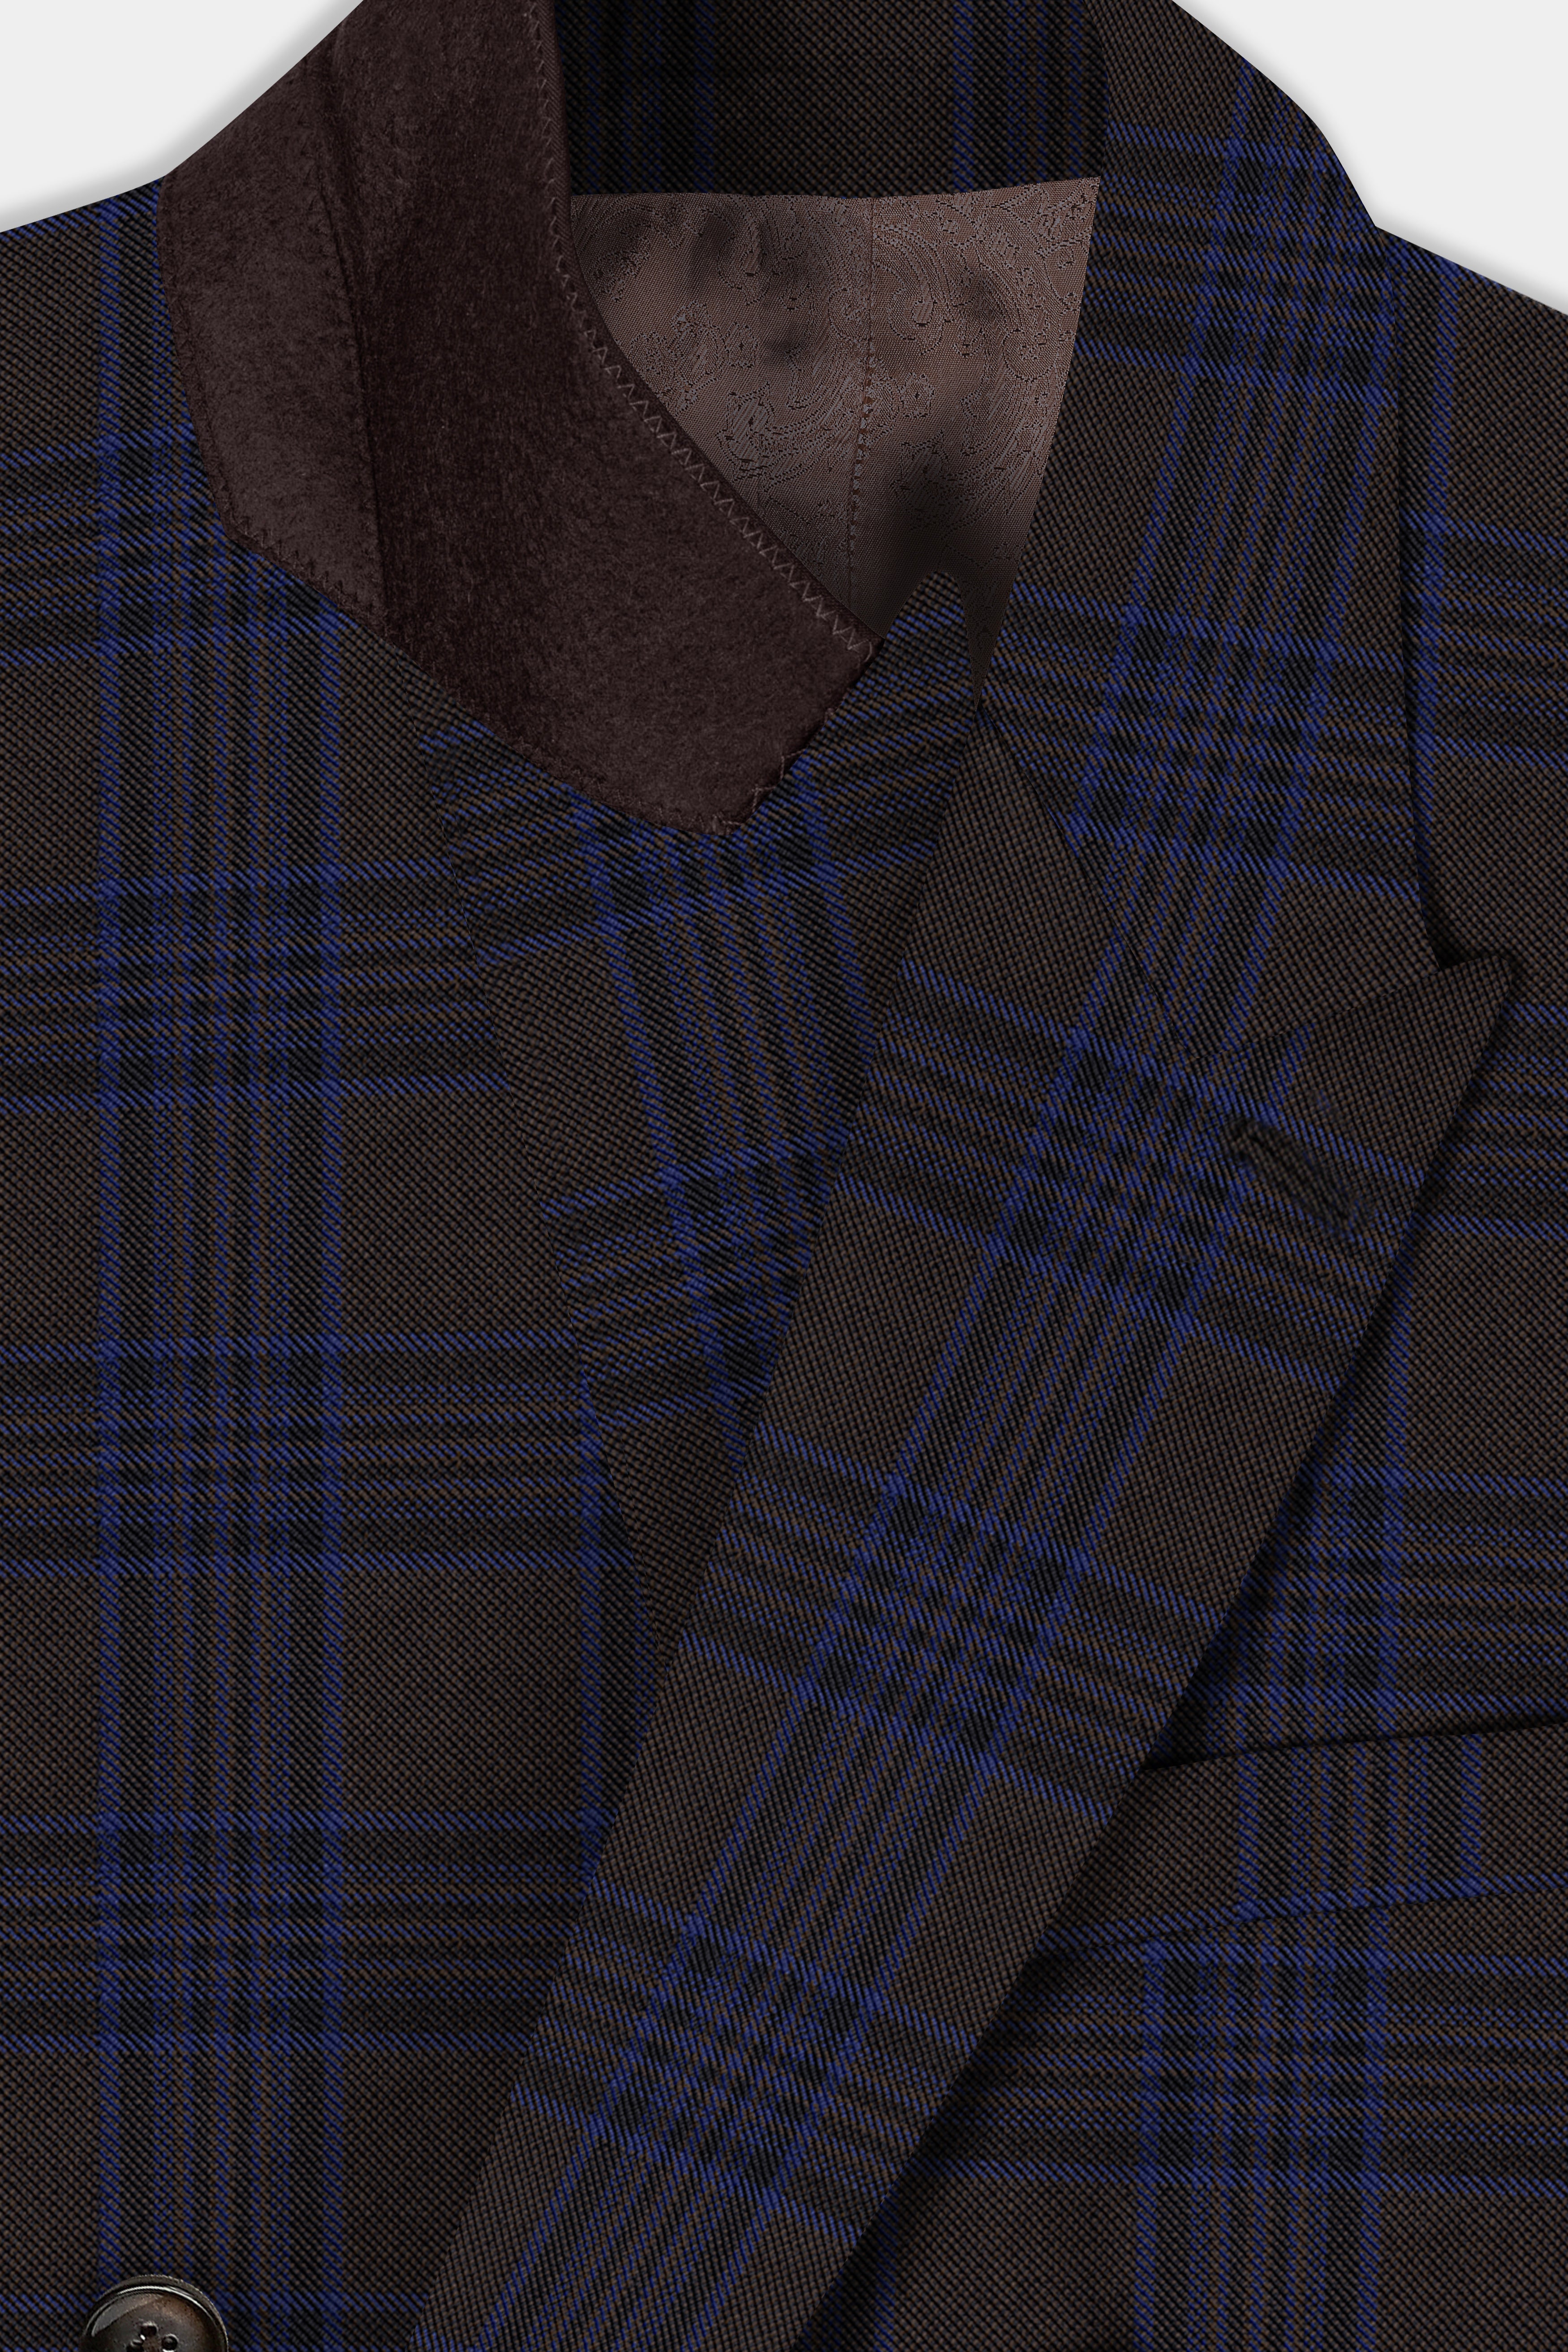 Coffee Bean Brown And Bunting Blue Windowpane Wool Rich Double Breasted Suit